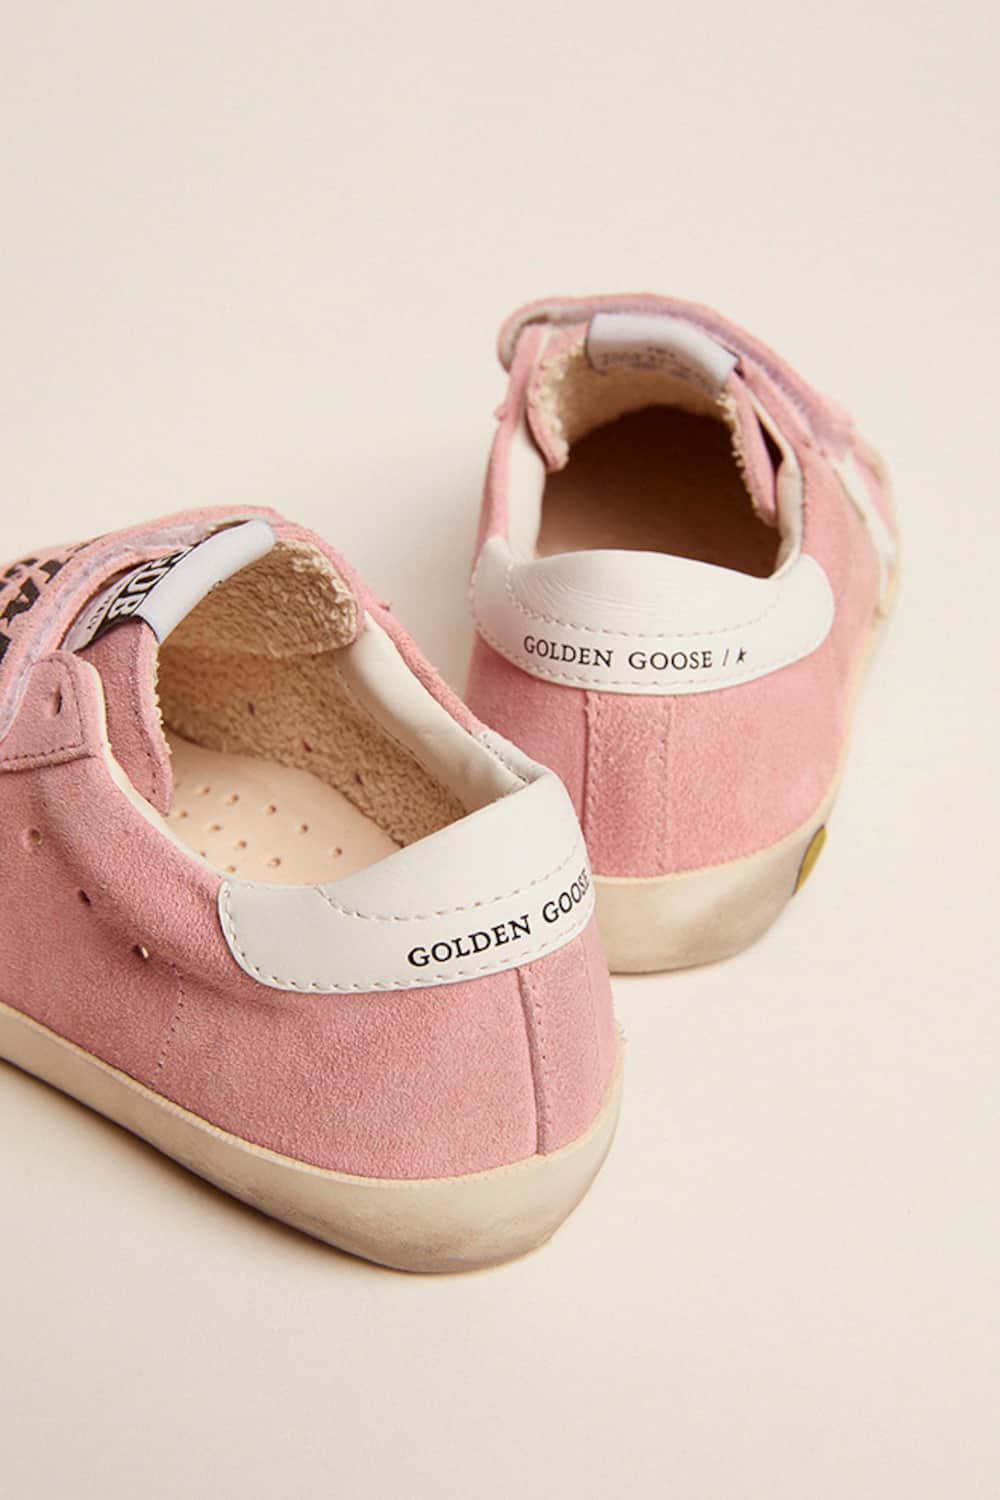 Golden Goose - Young Old School in pink suede with leather star and heel tab in 